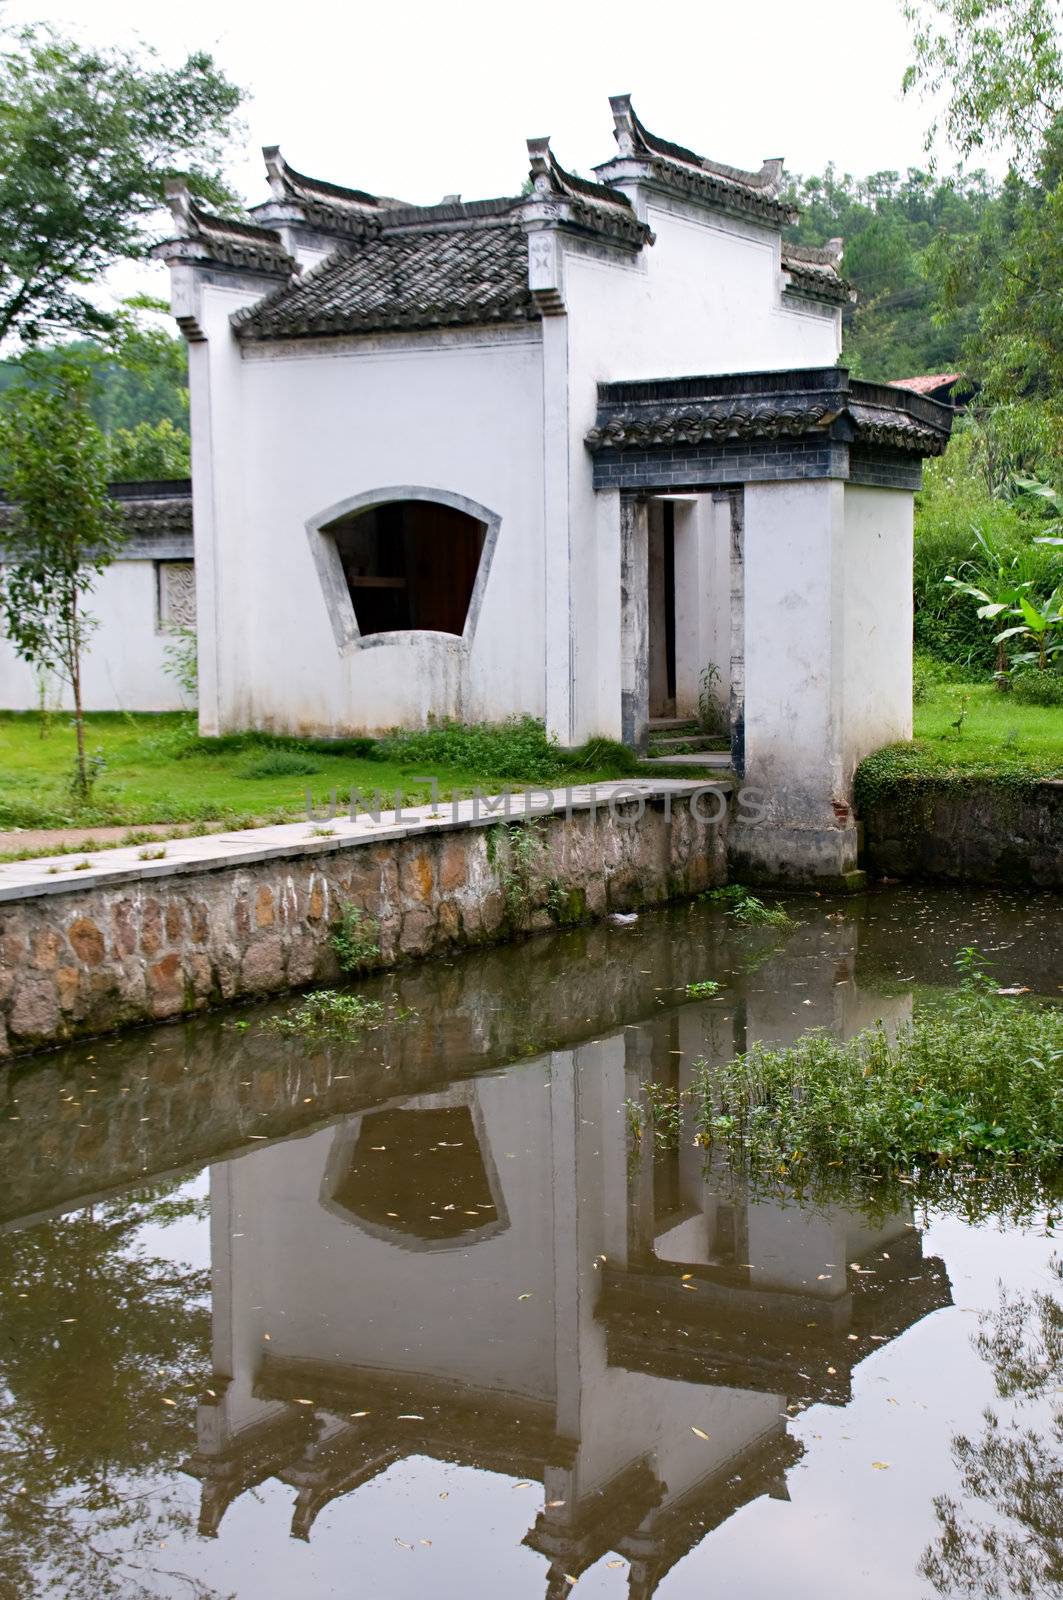 The Chinese architecture with reflection over lake in garden, jiangxi